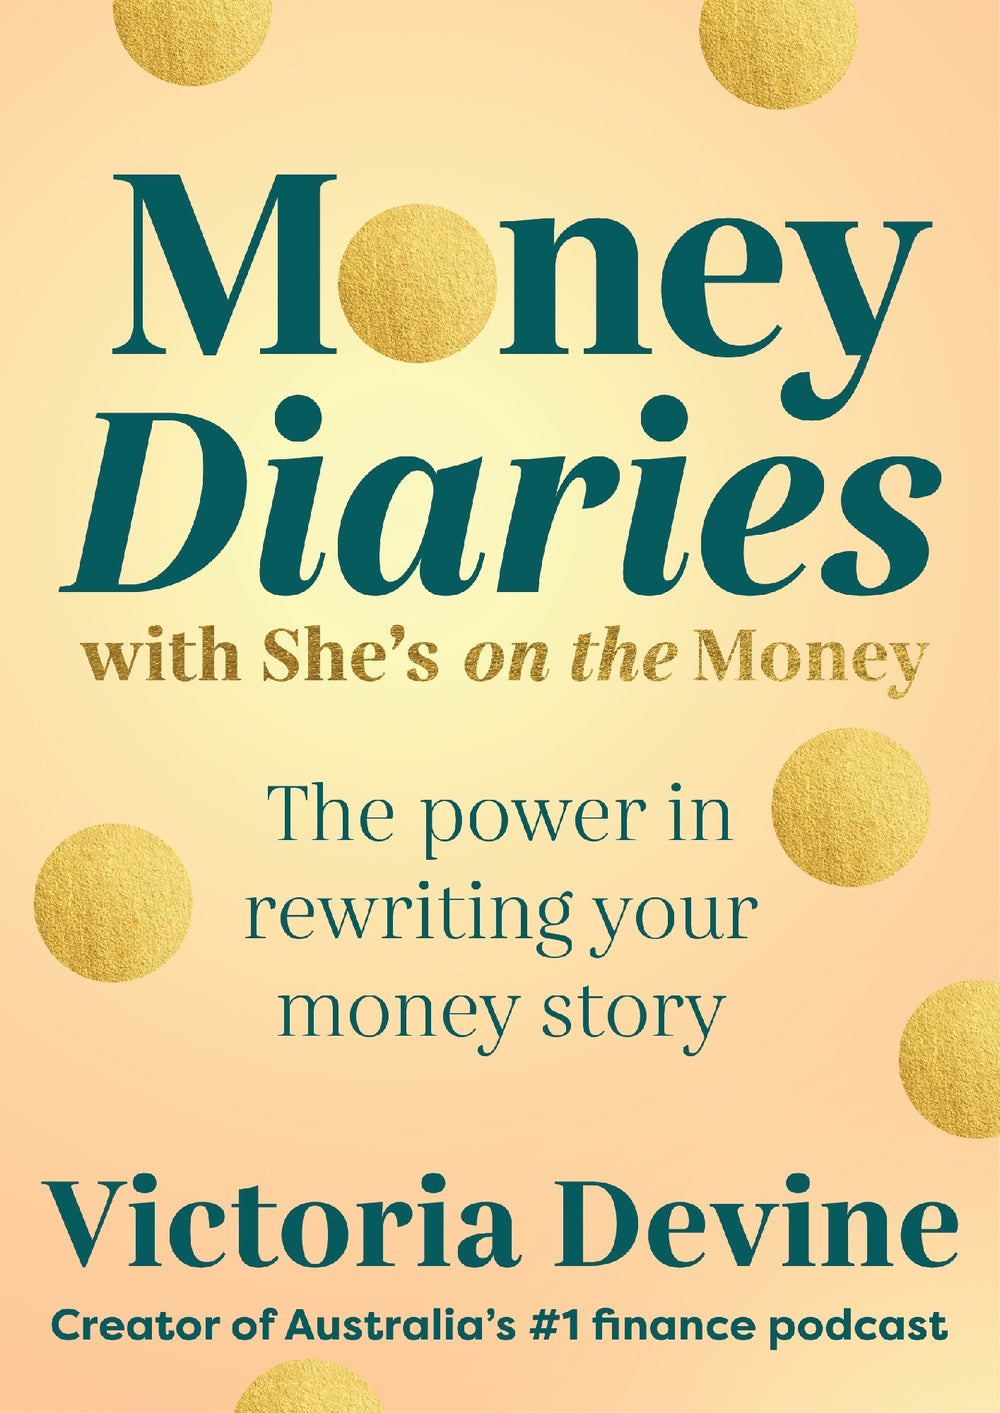 Money Diaries with She's on the Money